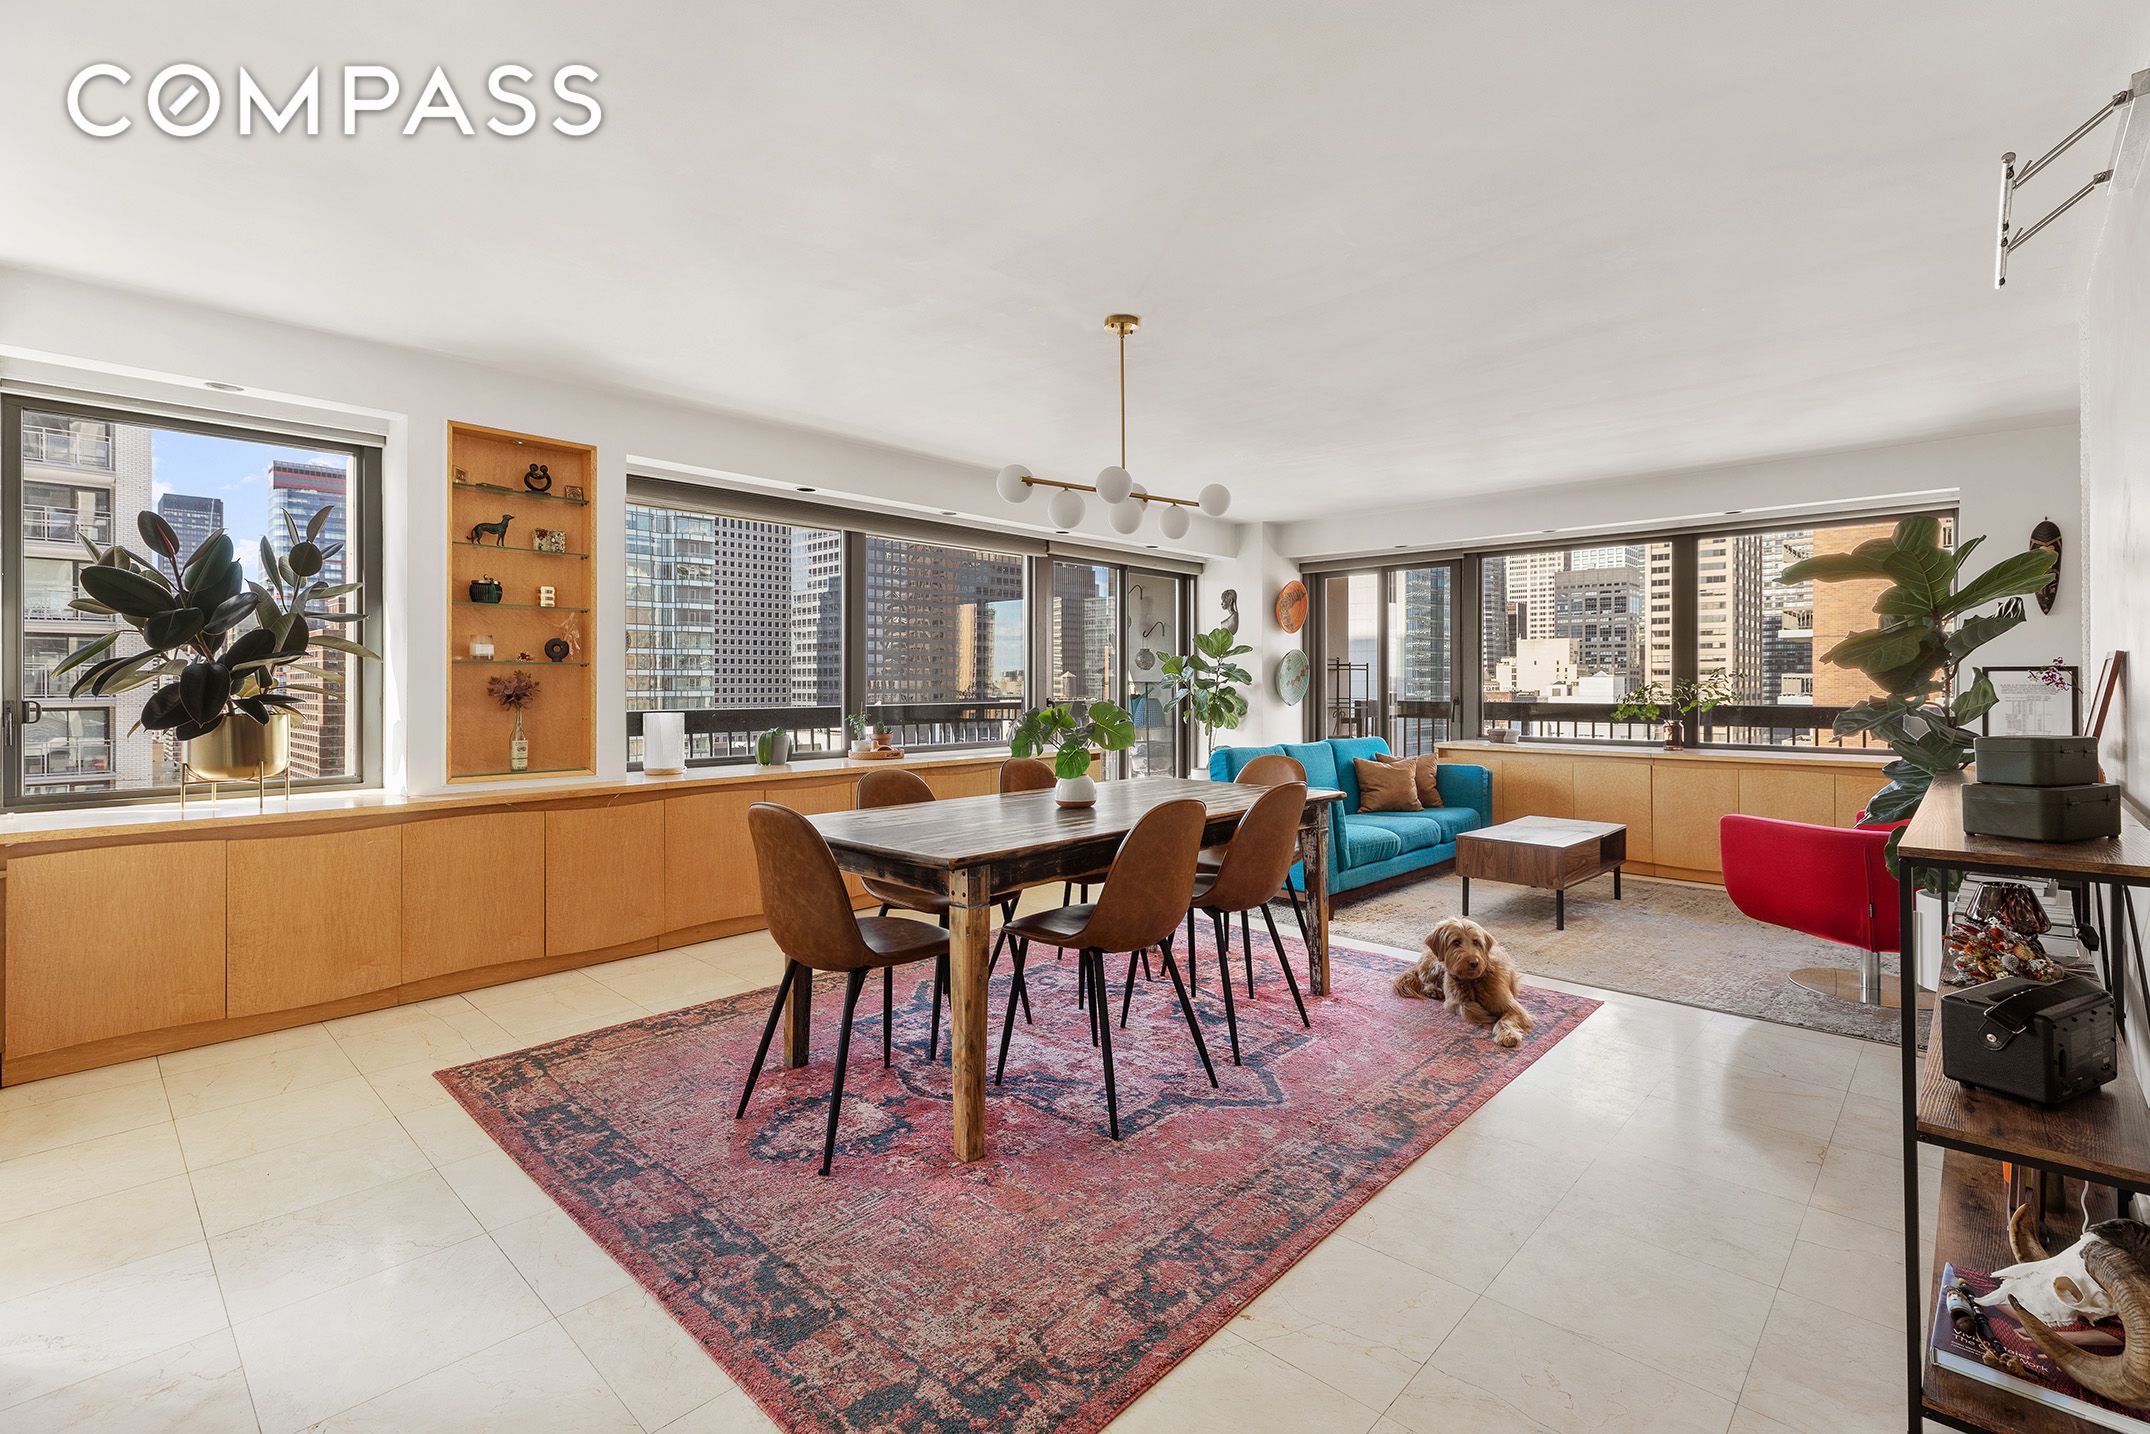 300 East 59th Street 2202/2203, Sutton Place, Midtown East, NYC - 3 Bedrooms  
2.5 Bathrooms  
5 Rooms - 